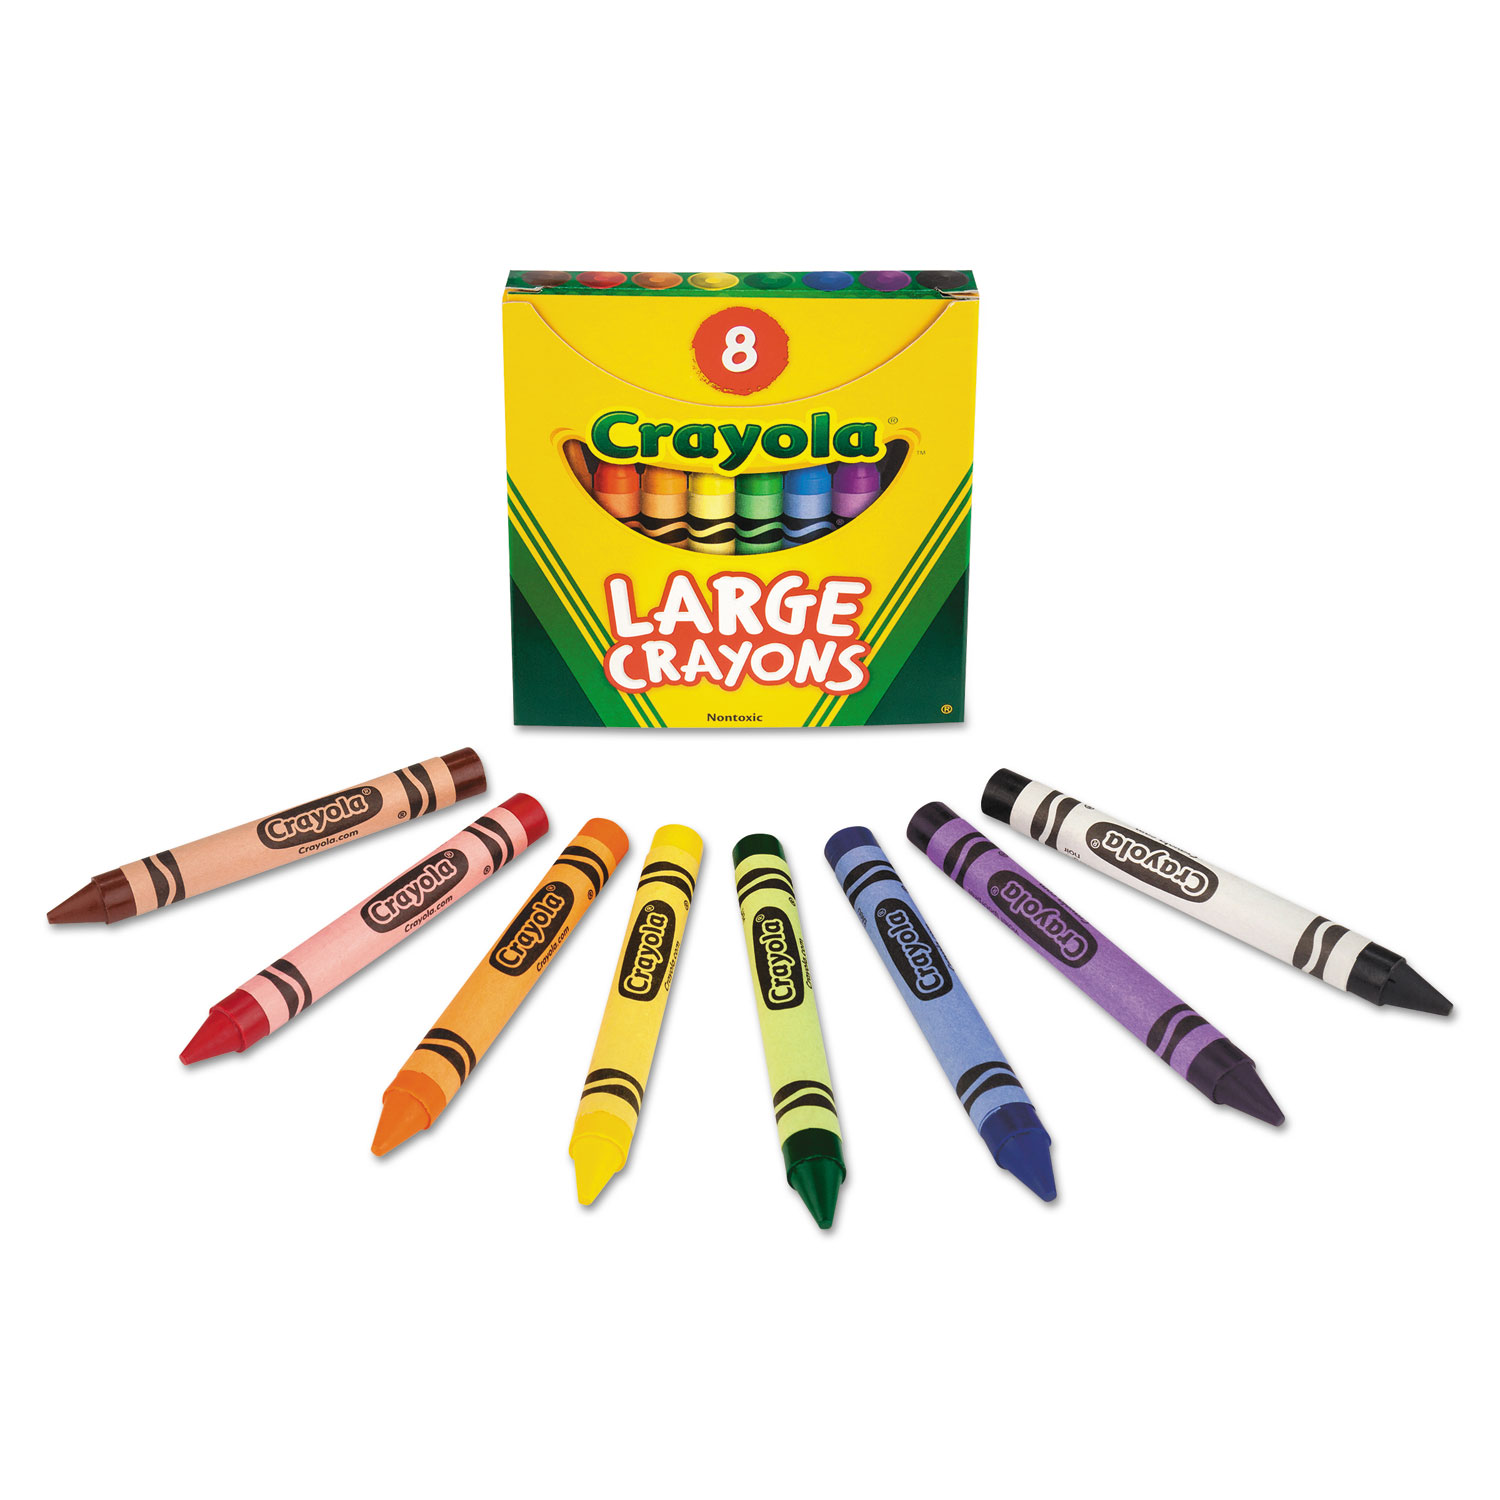 Large Crayons, Tuck Box, 8 Colors/Box - Pointer Office Products